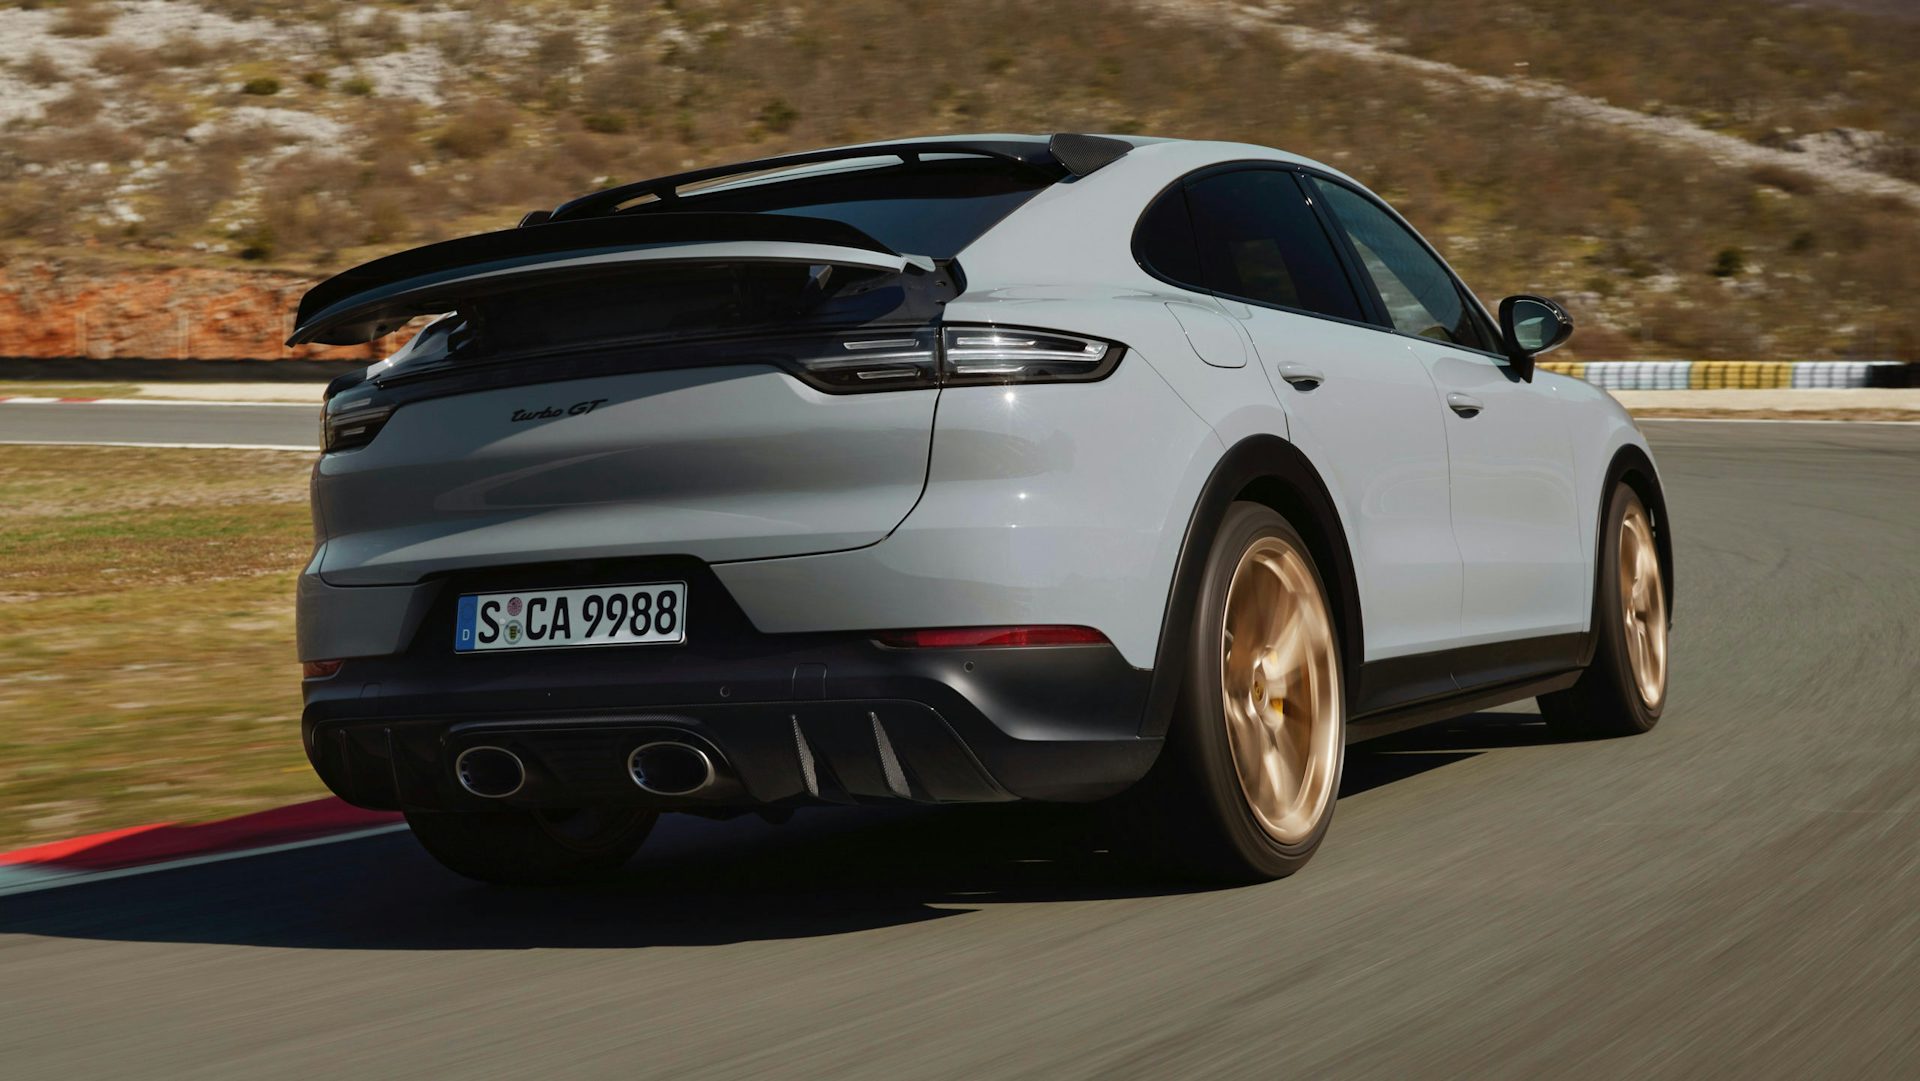 New Porsche Cayenne Turbo GT revealed price, specs and release date